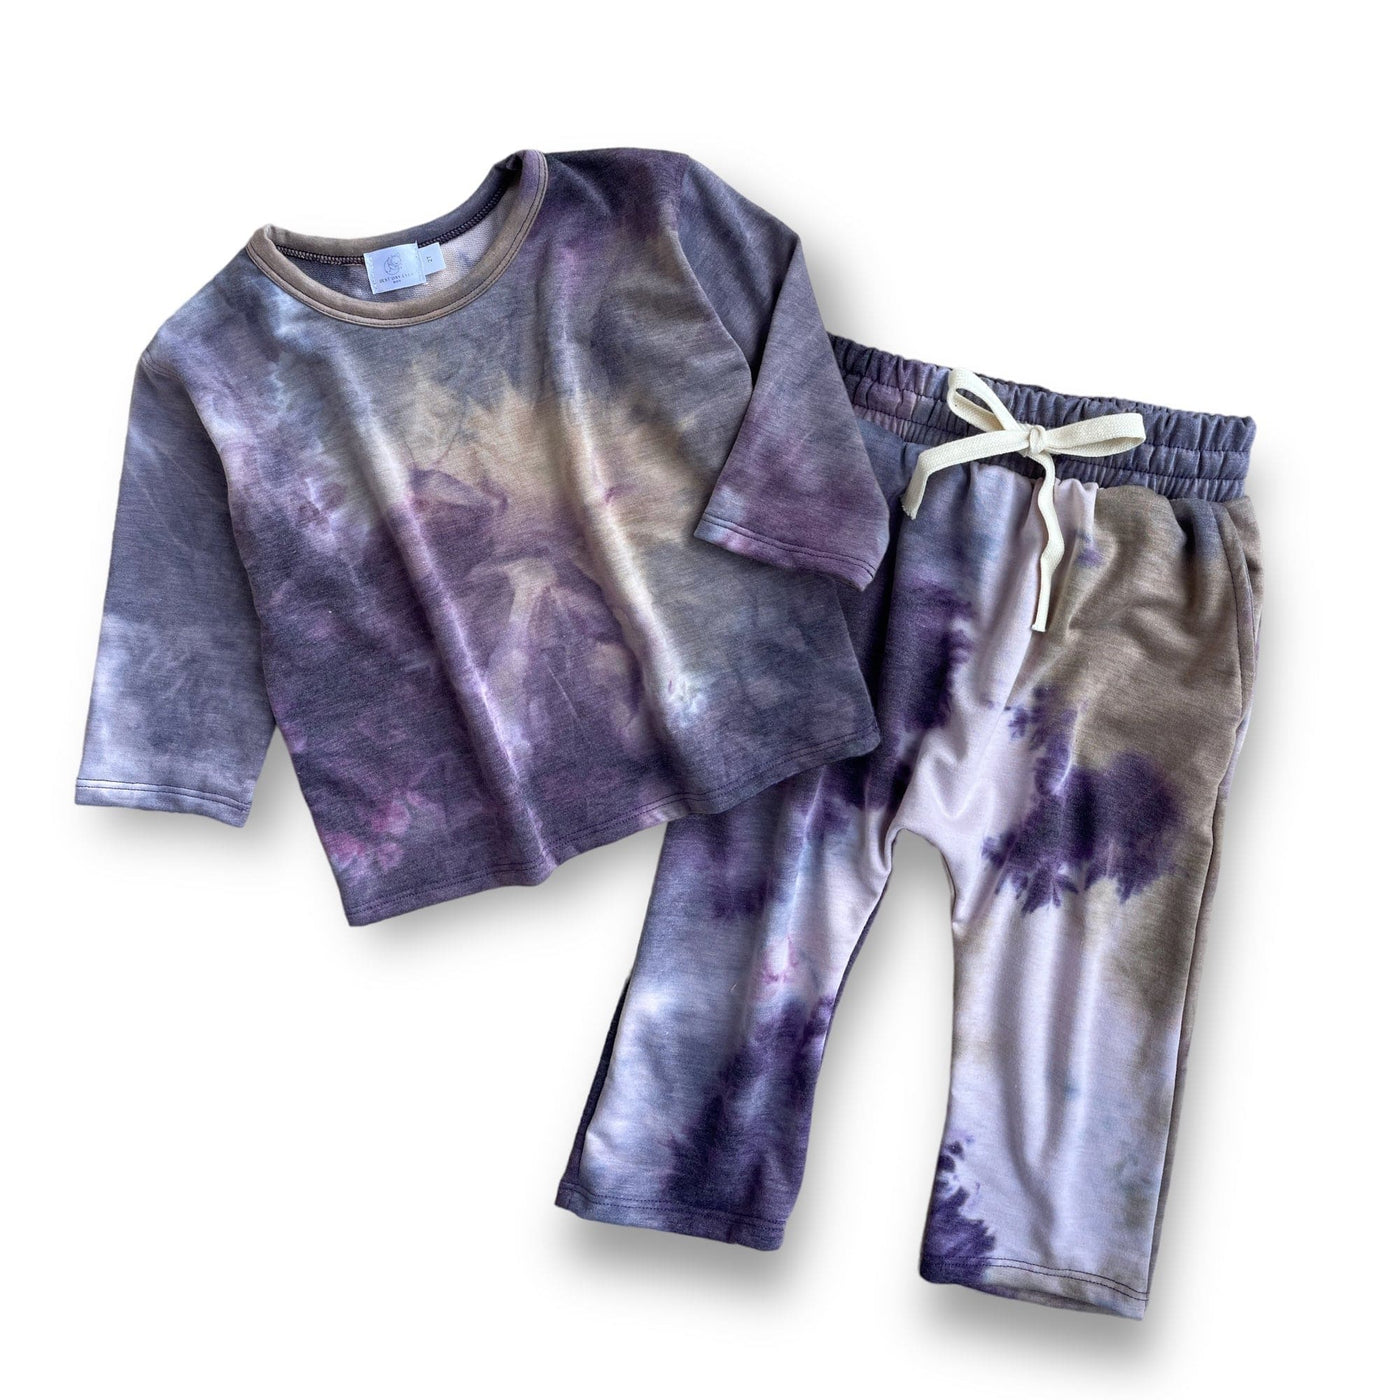 Best Day Ever Kids Baby & Toddler Outfits NYC Tie Dye Pullover Set buy online boutique kids clothing